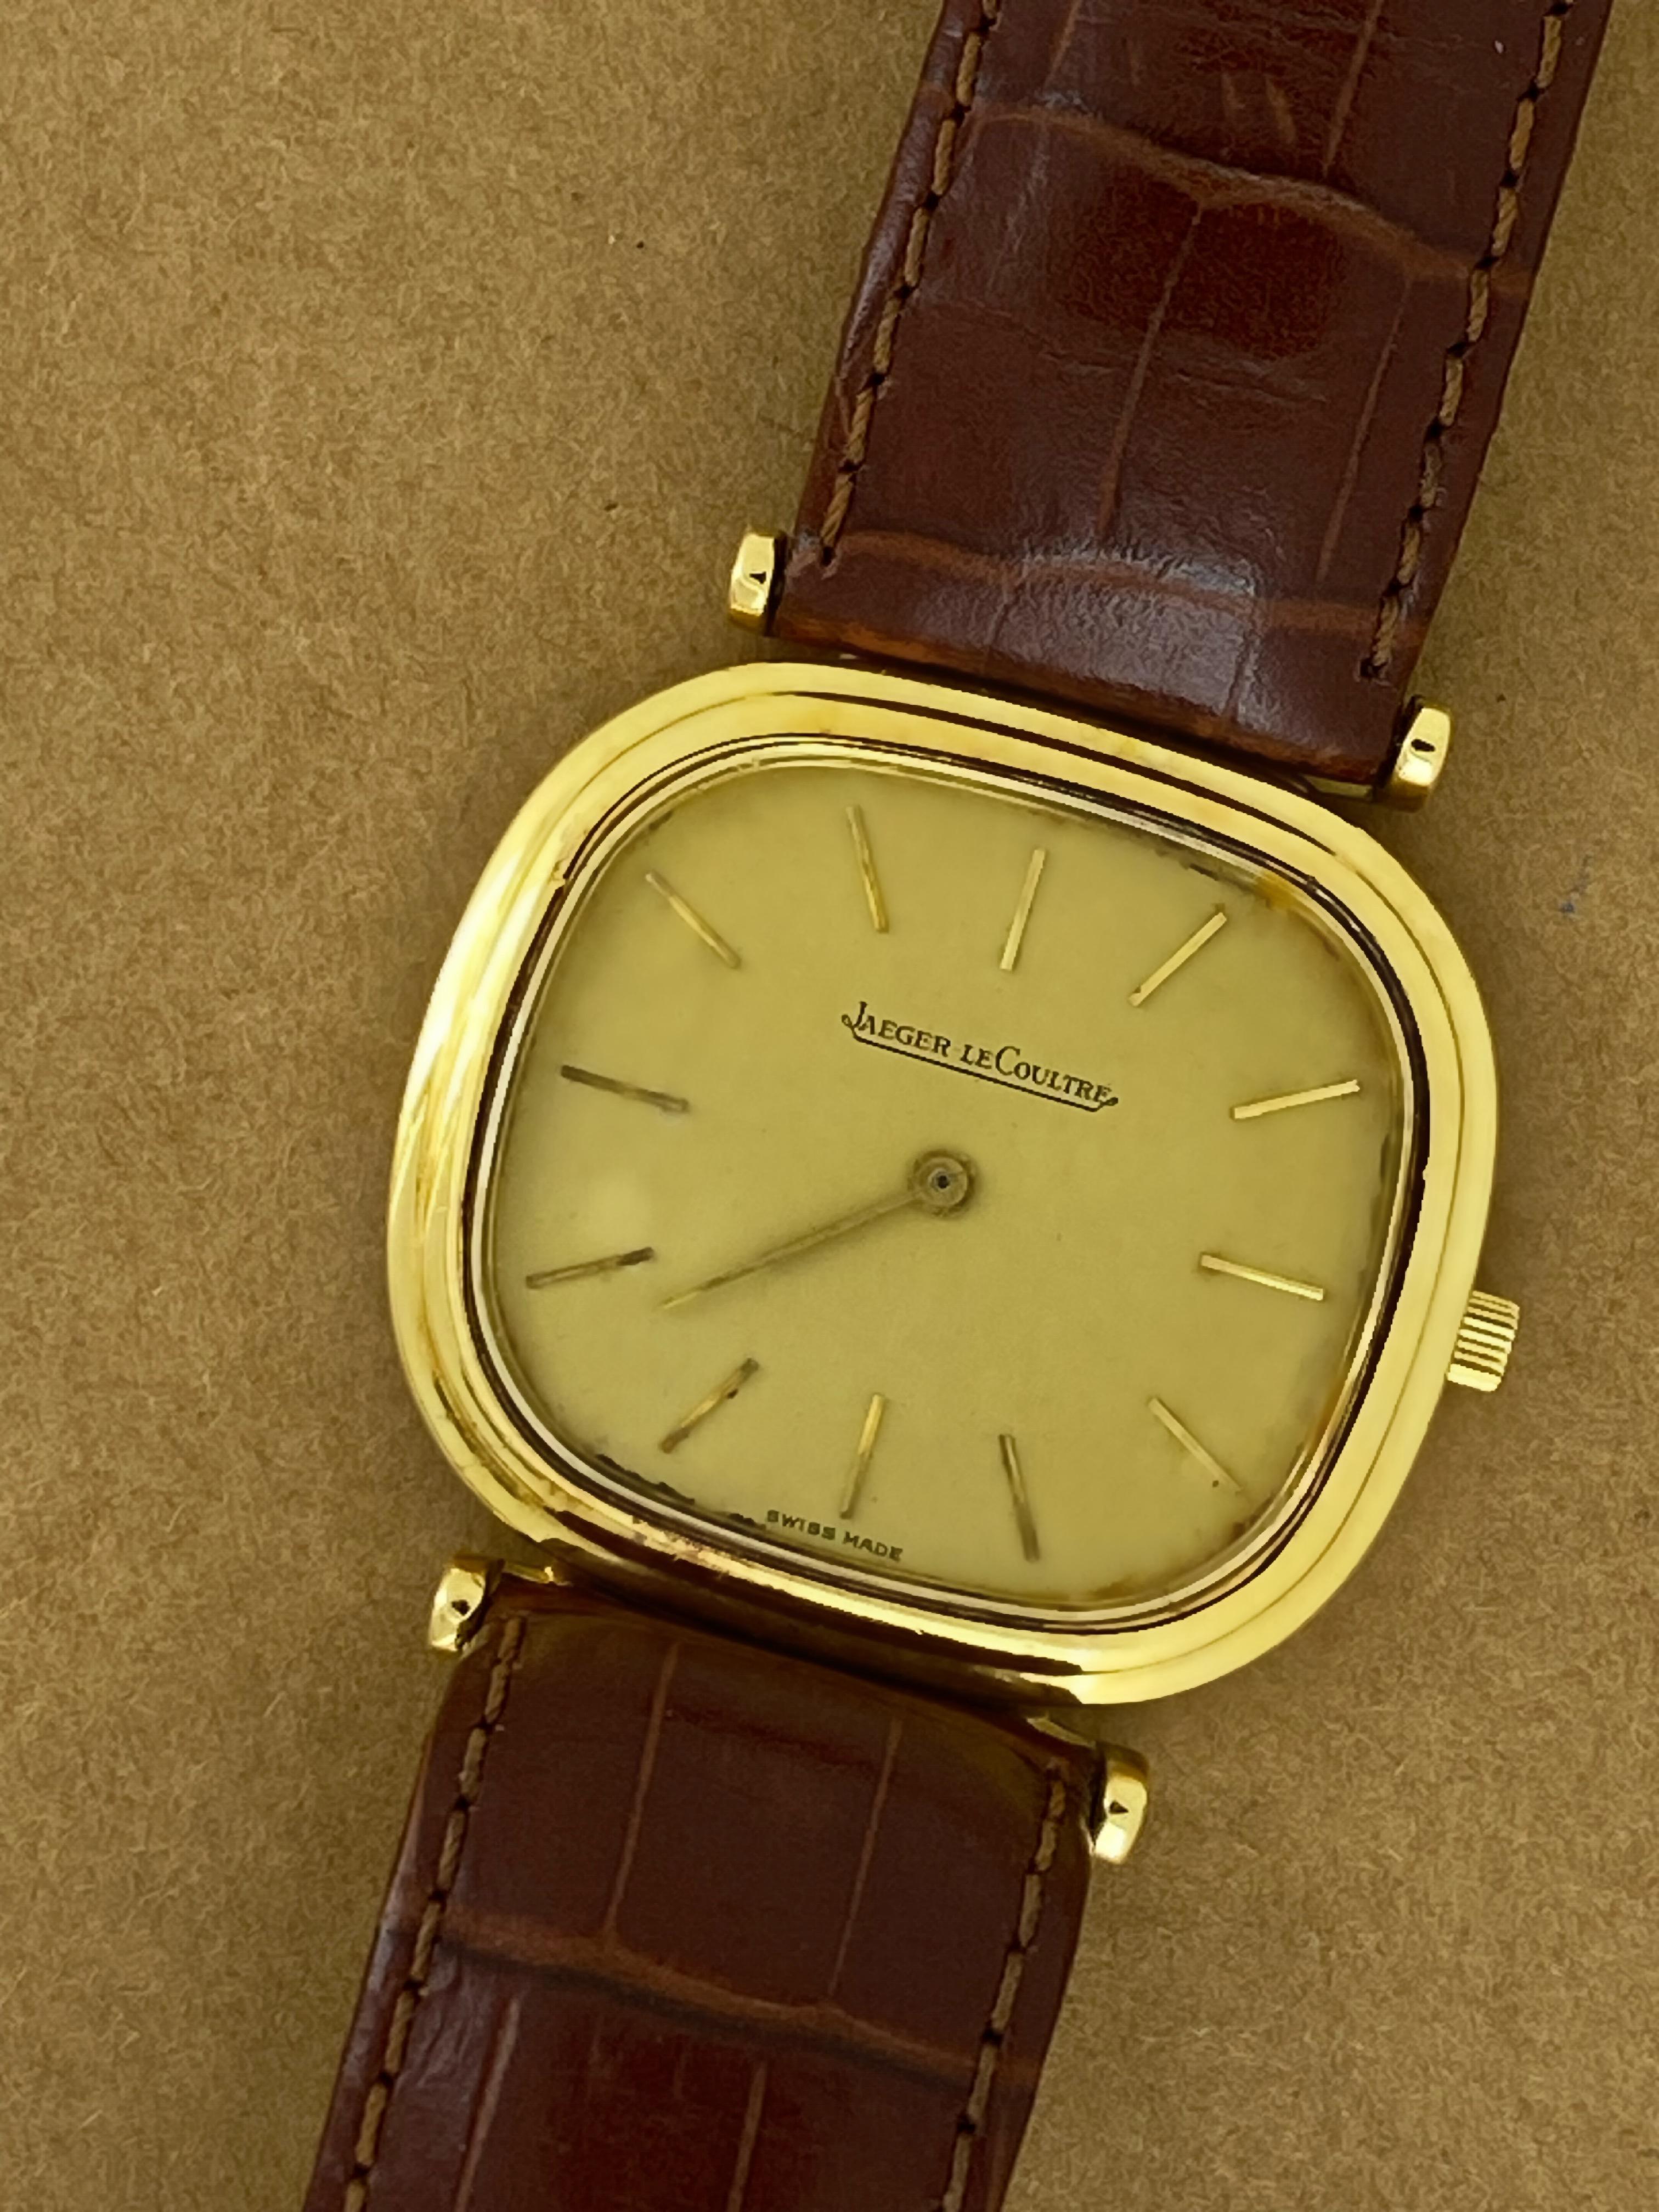 Men's 18K Gold Jaeger Le-Coultre ref 9132 Cushion Case Manual 17 jewels Cal 818 Watch For Sale